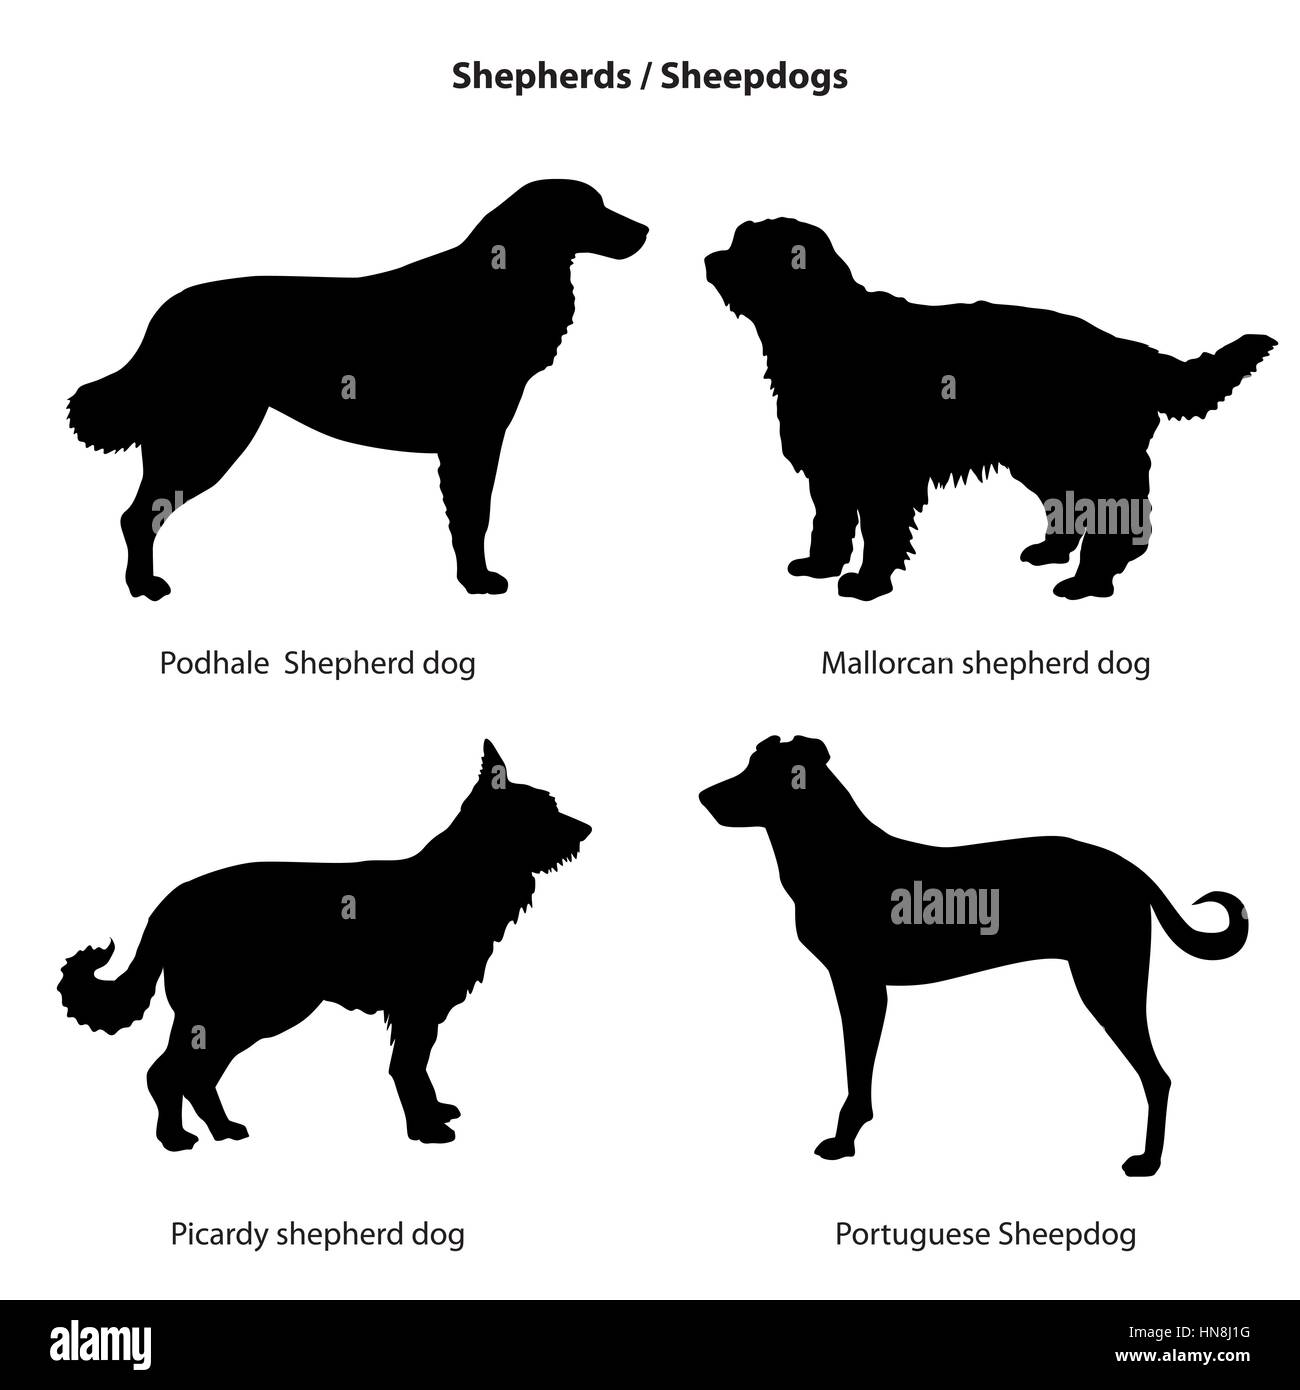 Dog silhouette icon set. Sheped dog collection. Sheedogs. Stock Vector